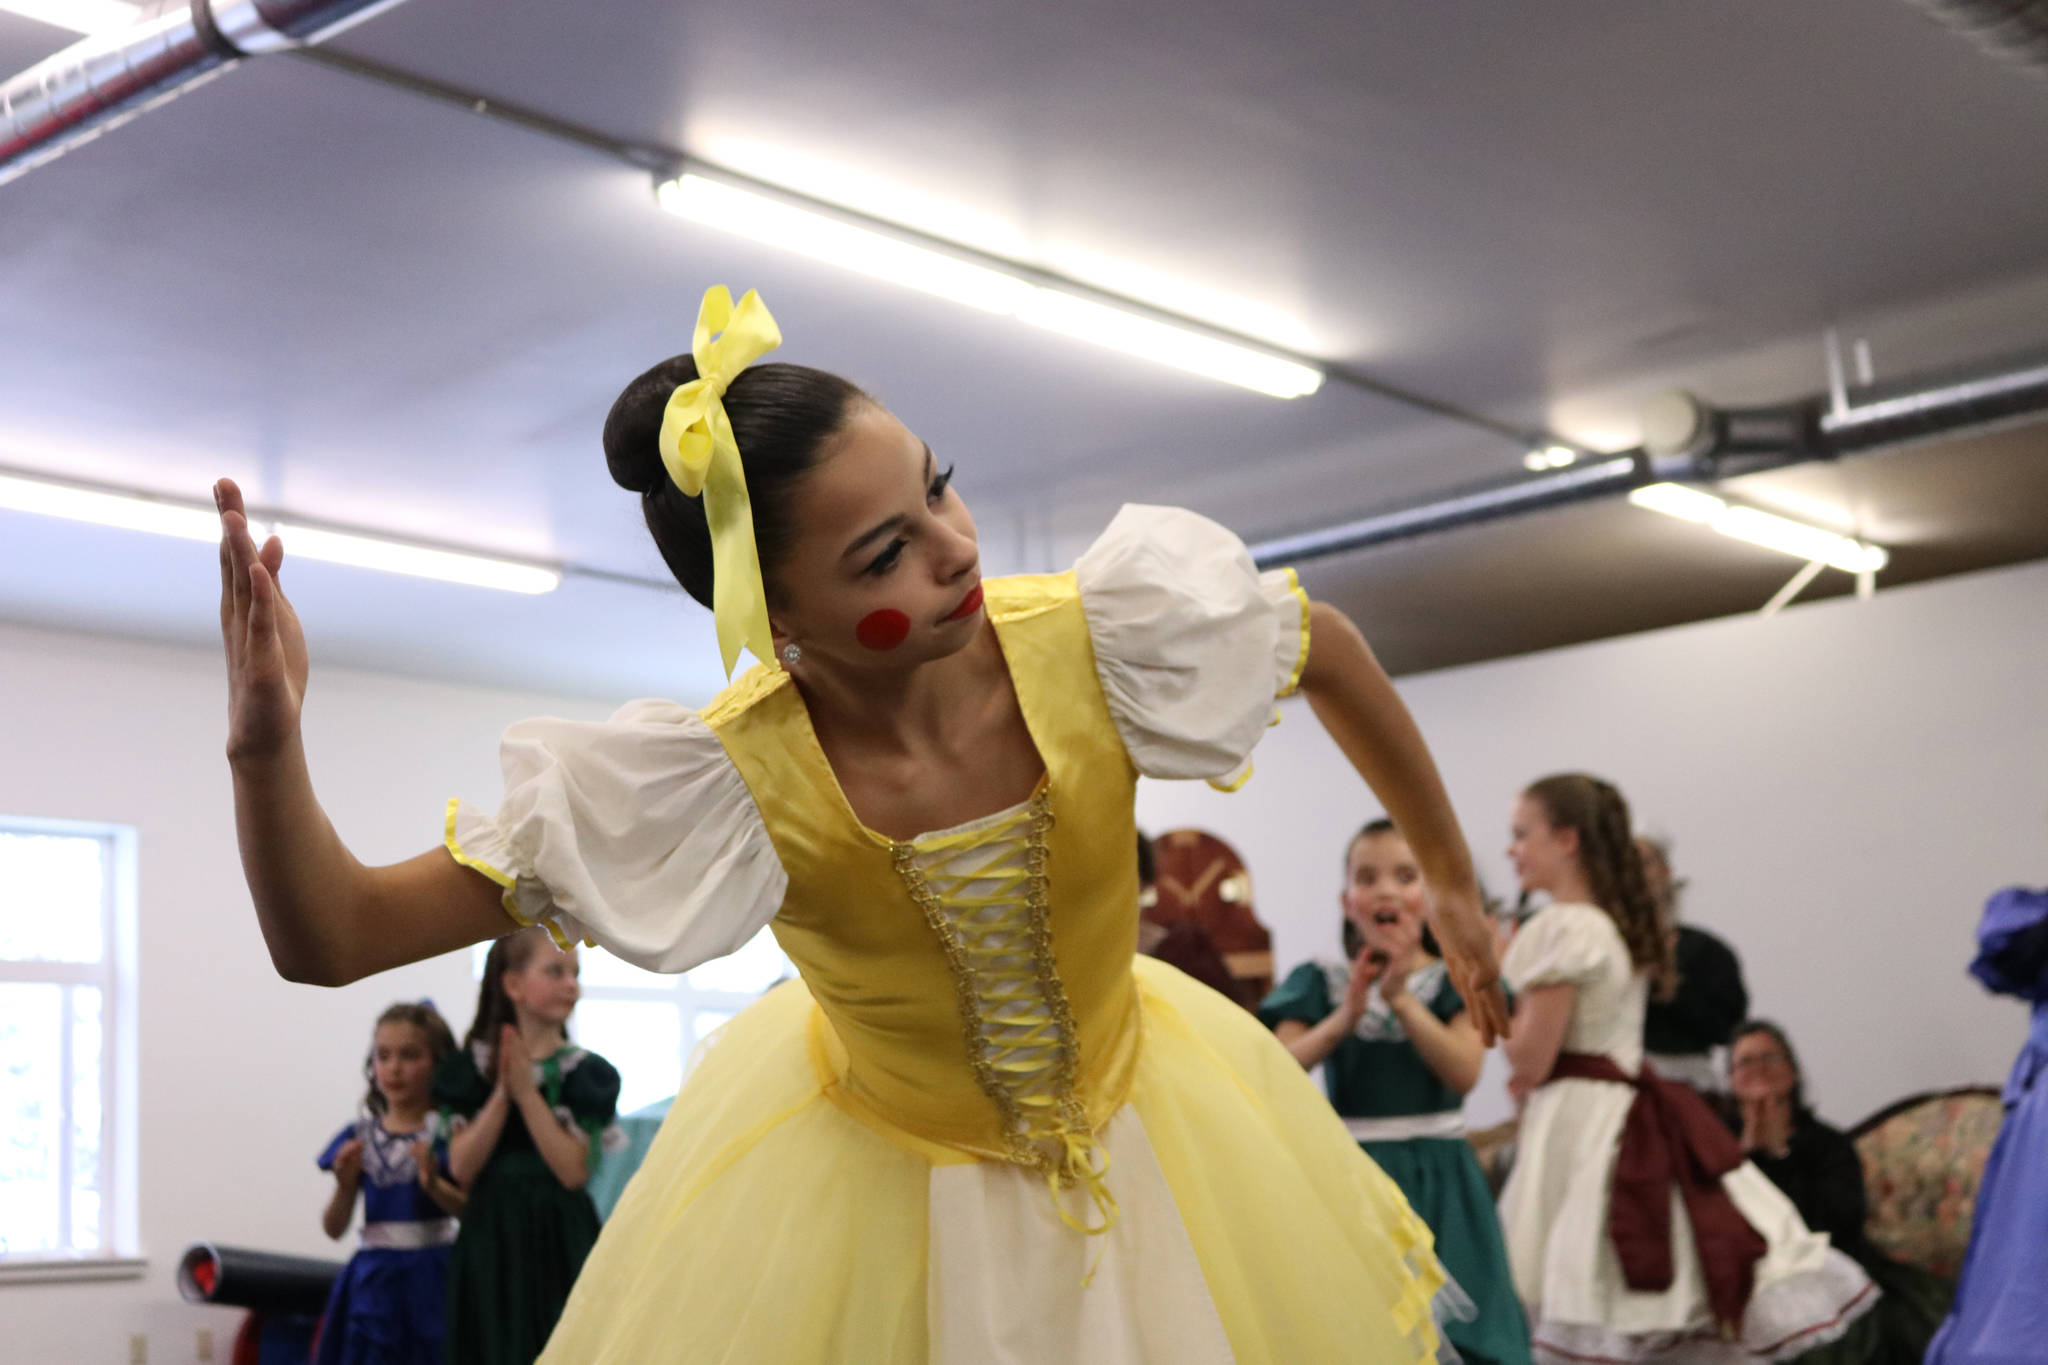 Megan Lujan, 14, as a mechanical doll for Herr Drosselmeyer’s entertainment for the children during the party scene. (Erin Laughlin | For the Capital City Weekly)